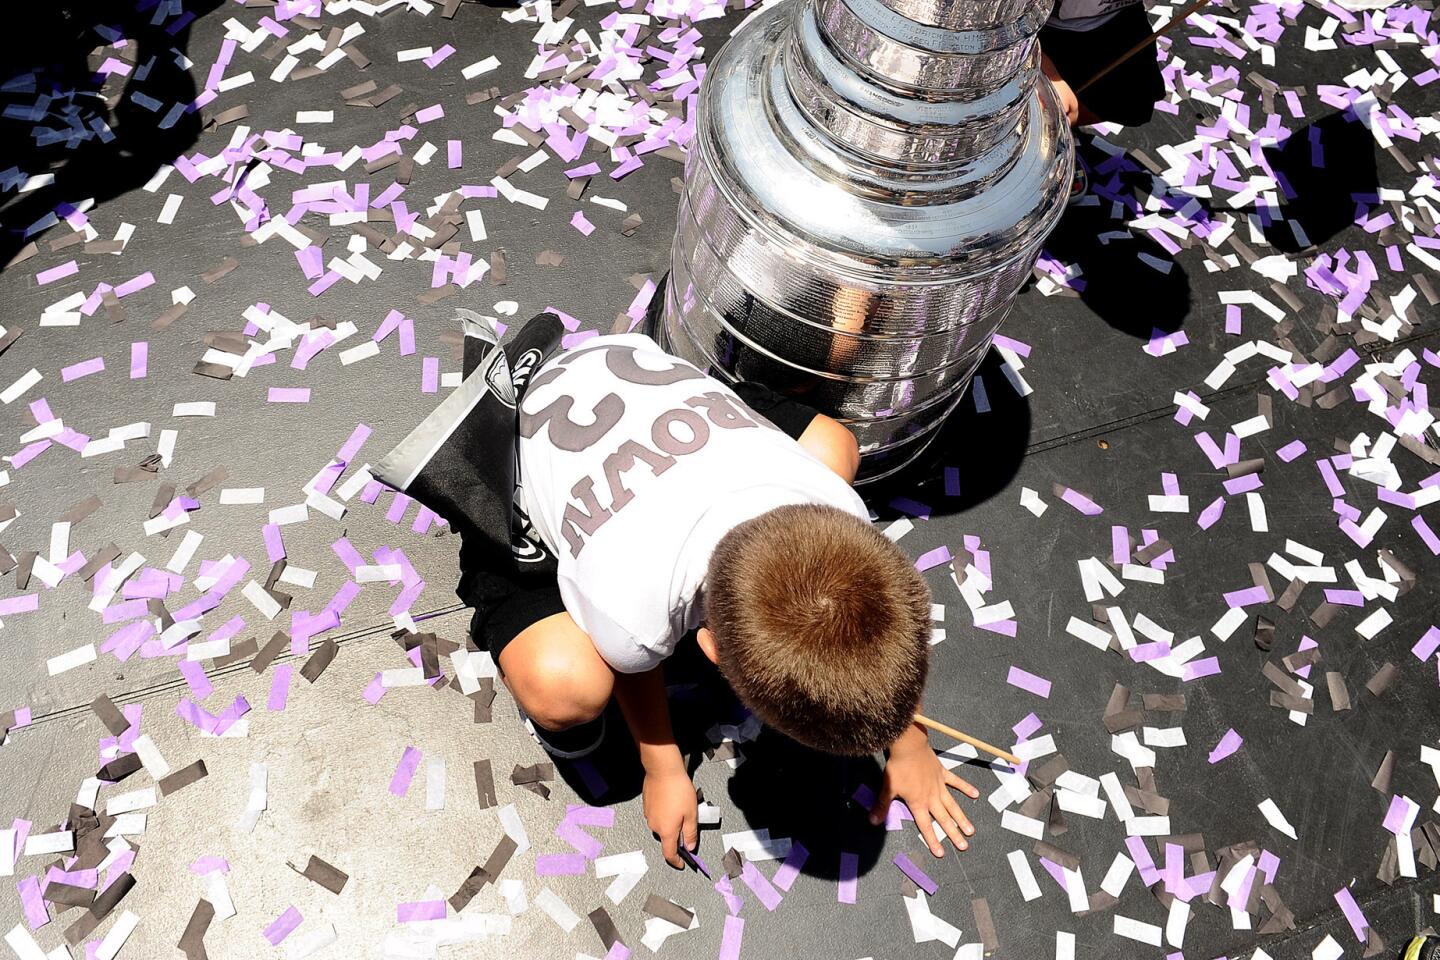 Los Angeles Kings Stanley Cup parade: Live updates from Los Angeles, Monday  June 16 – Pasadena Star News